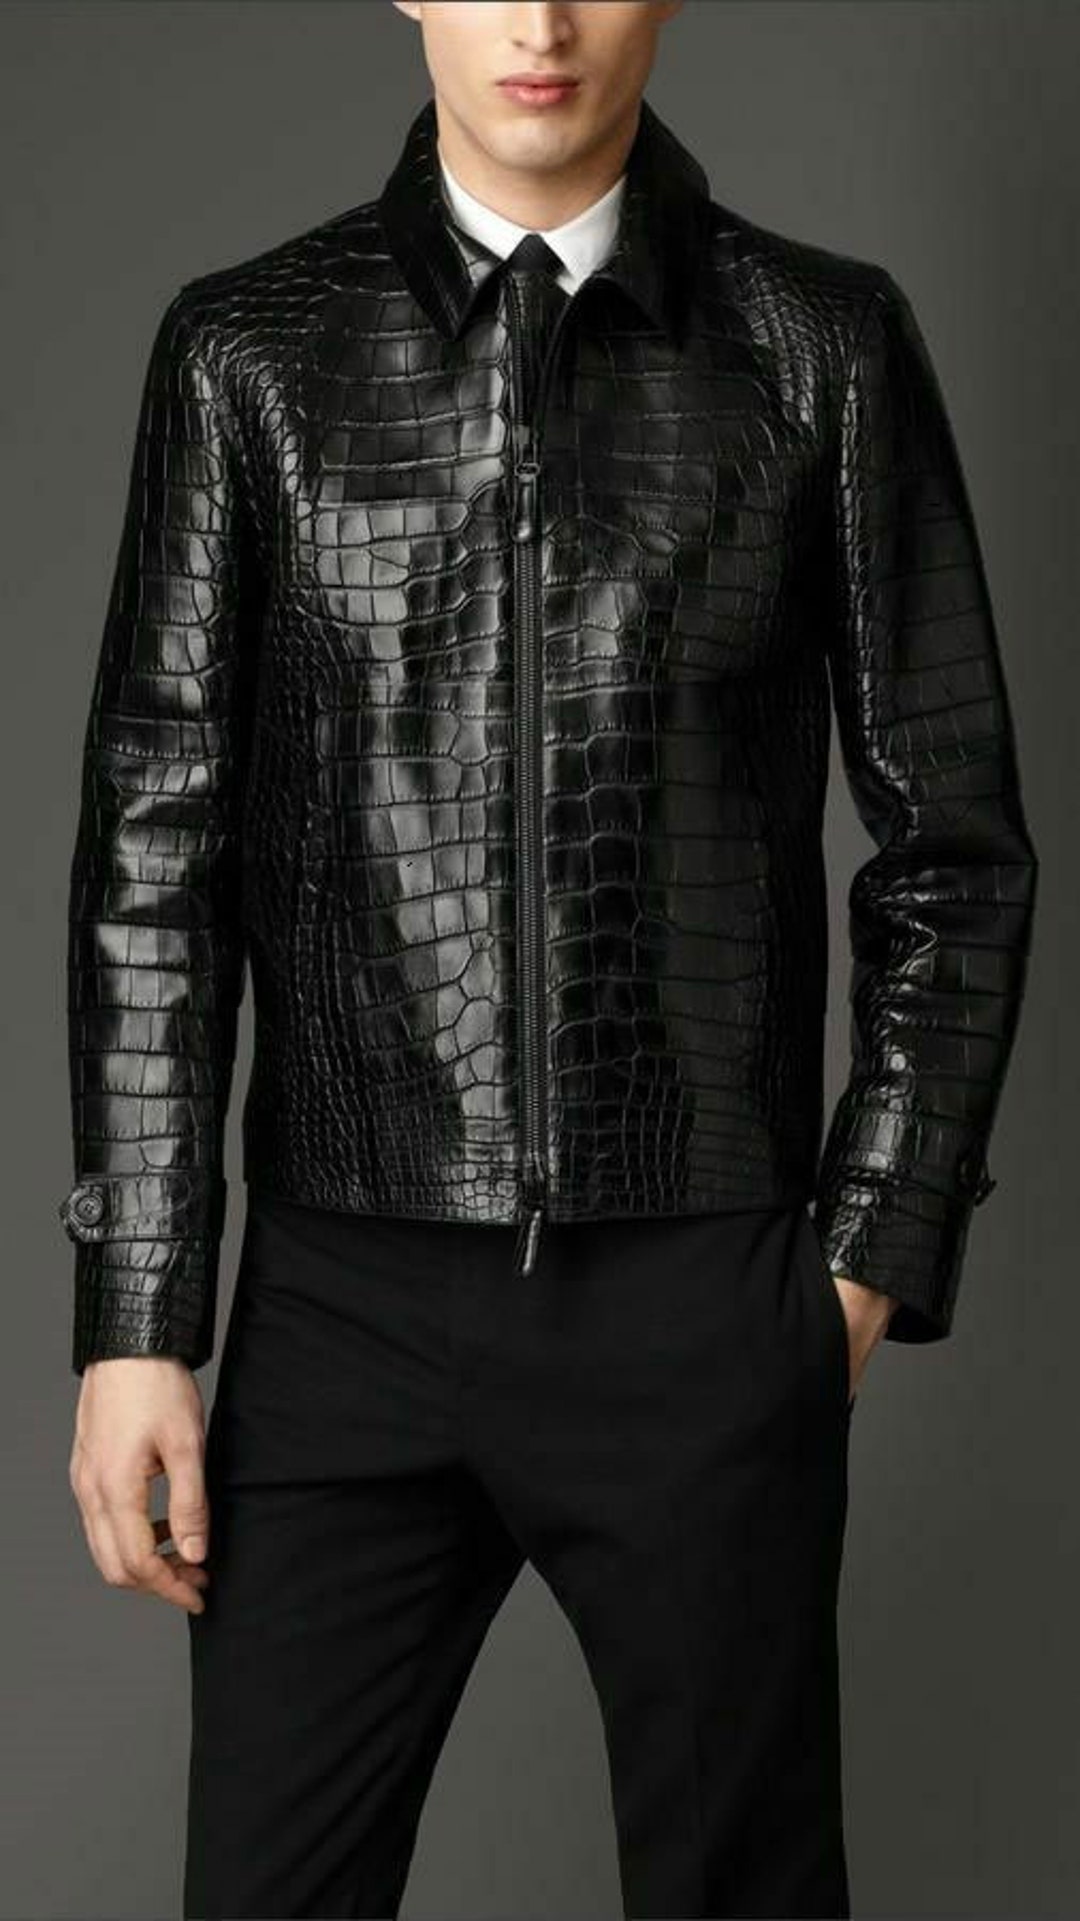 Crocodile Print Leather Jackets Genuine Cow Leather Available - Etsy